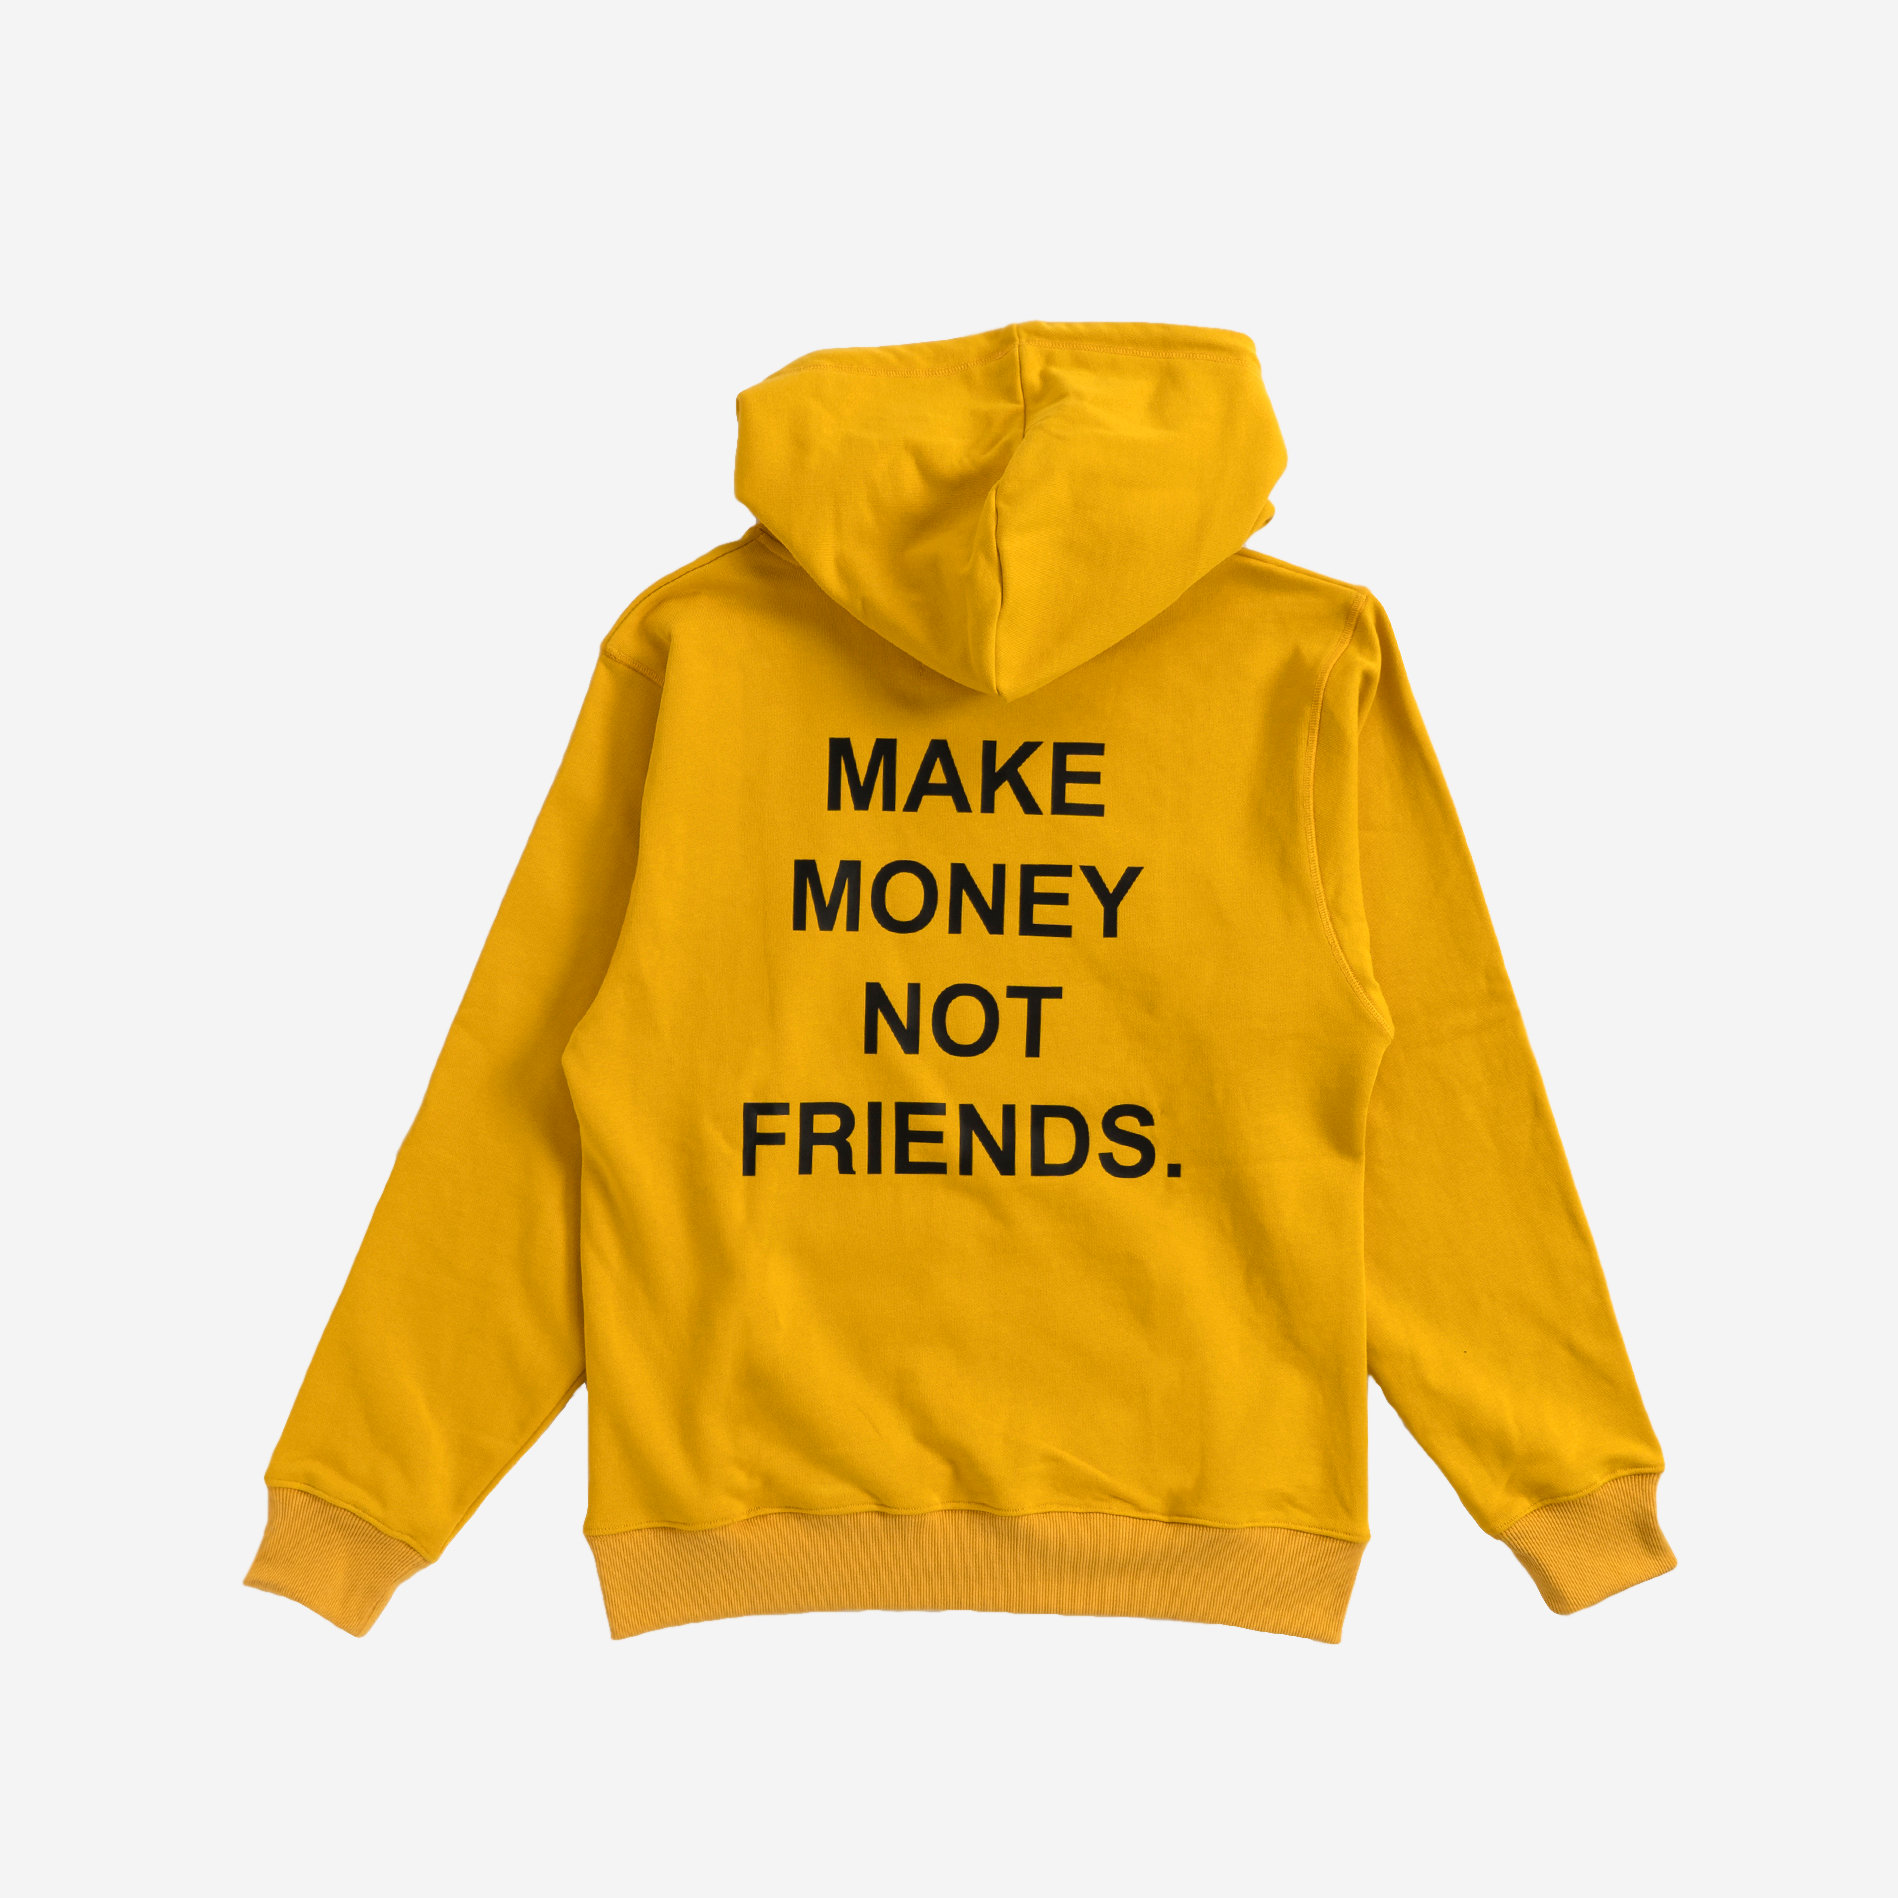 I Want Money Not Friends Hoodie